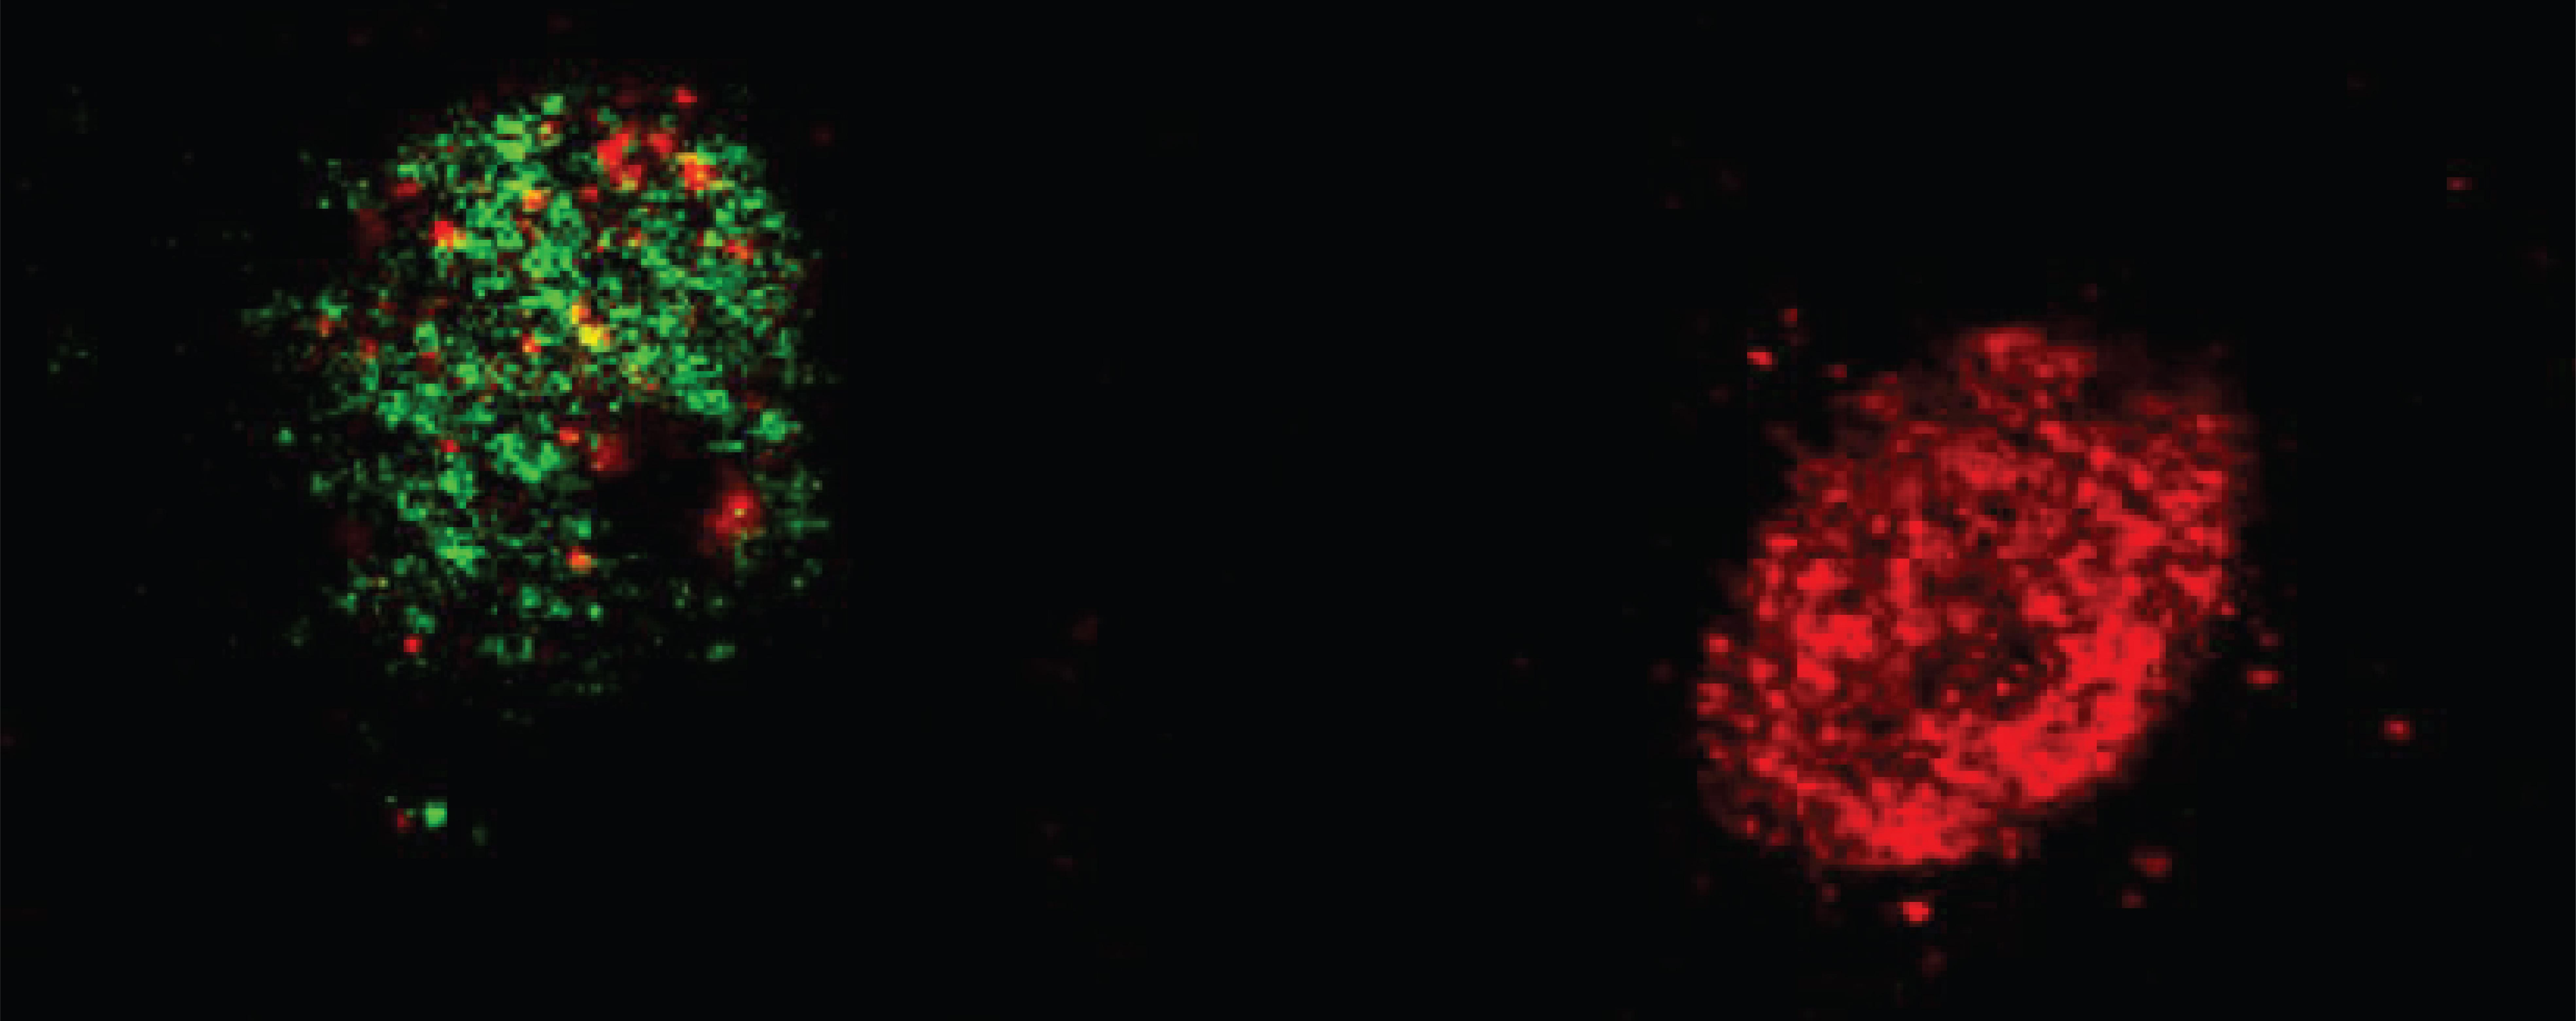 Neurons have variable levels of chromatin compaction, shown as different shades of red. The less compact a neuron, the more likely it is to be recruited into the memory trace (green). Credit: Giulia Santoni (EPFL)